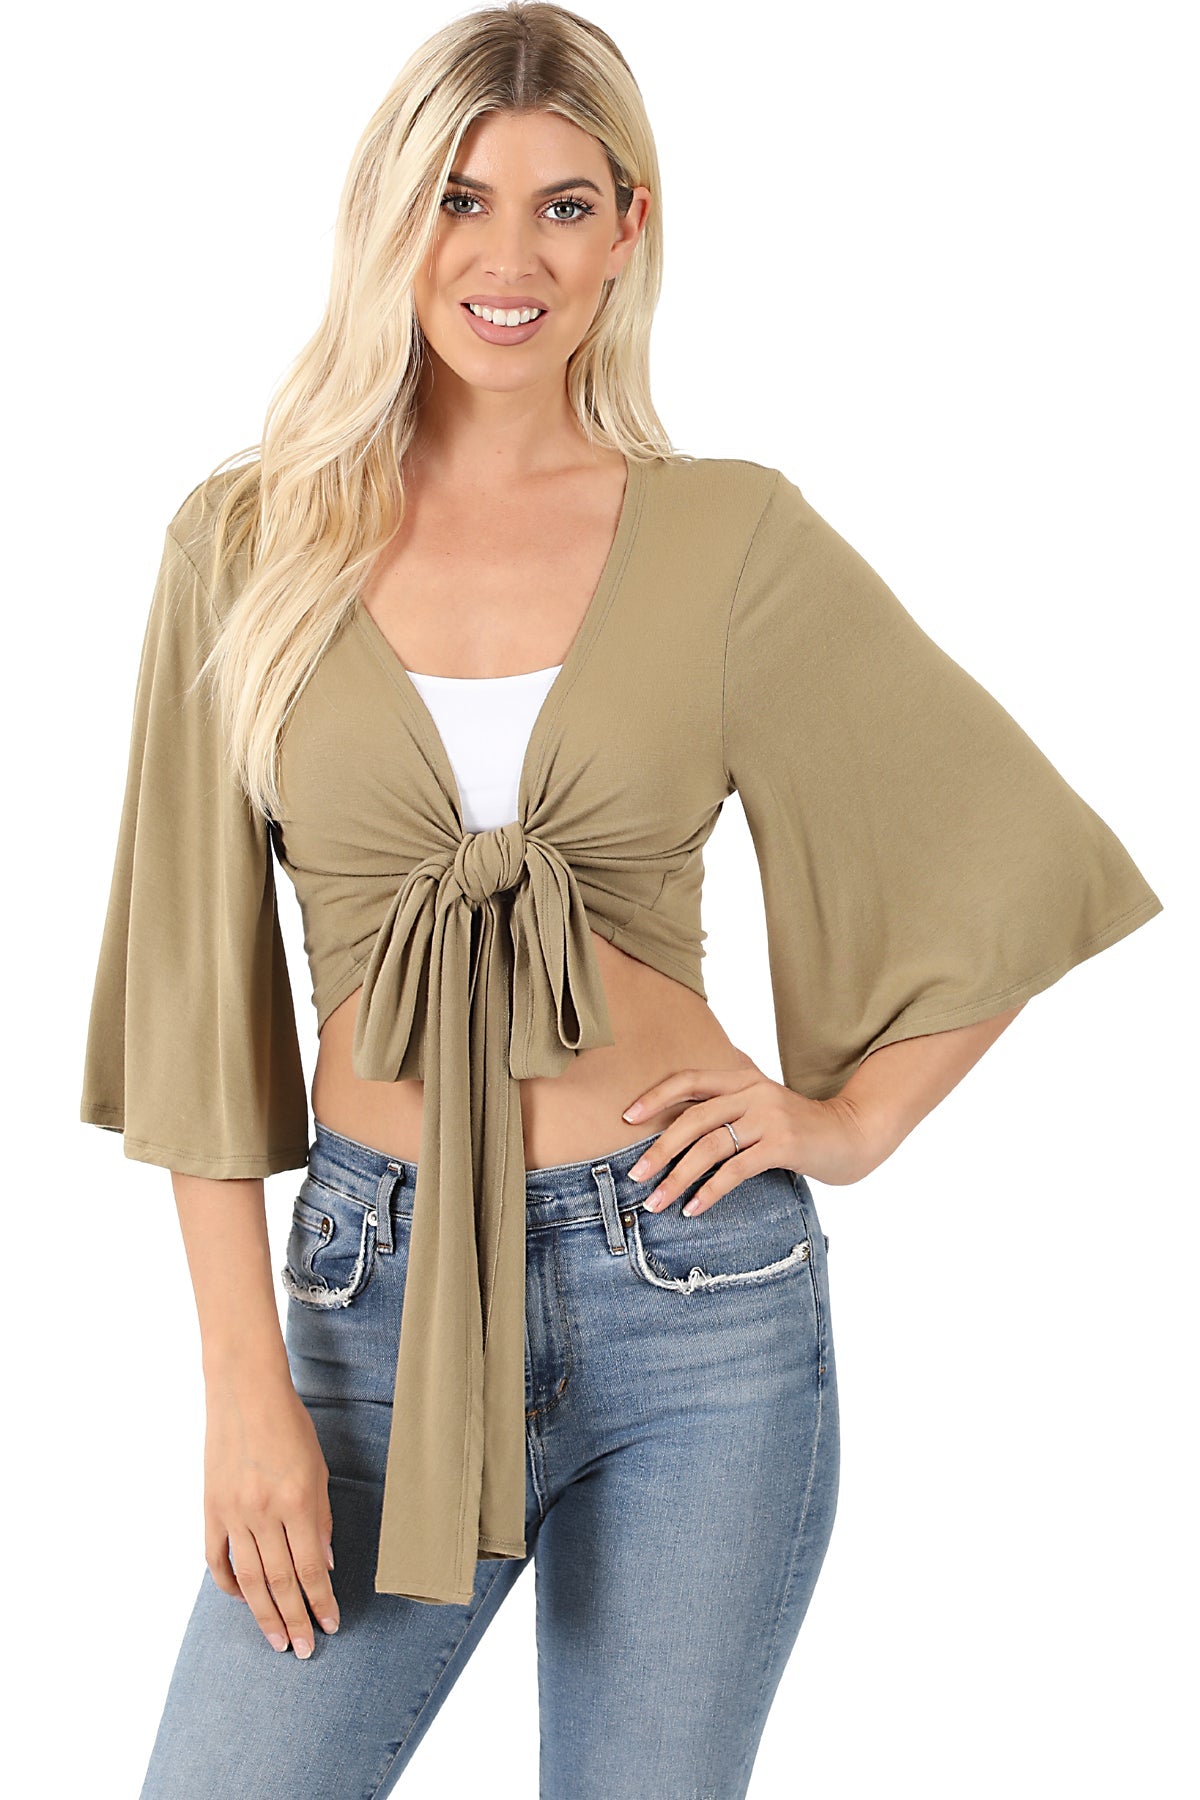 Women Deep V Neck Tie Knot Front Flare Sleeves Basic Crop Top and Cardigan Convertible